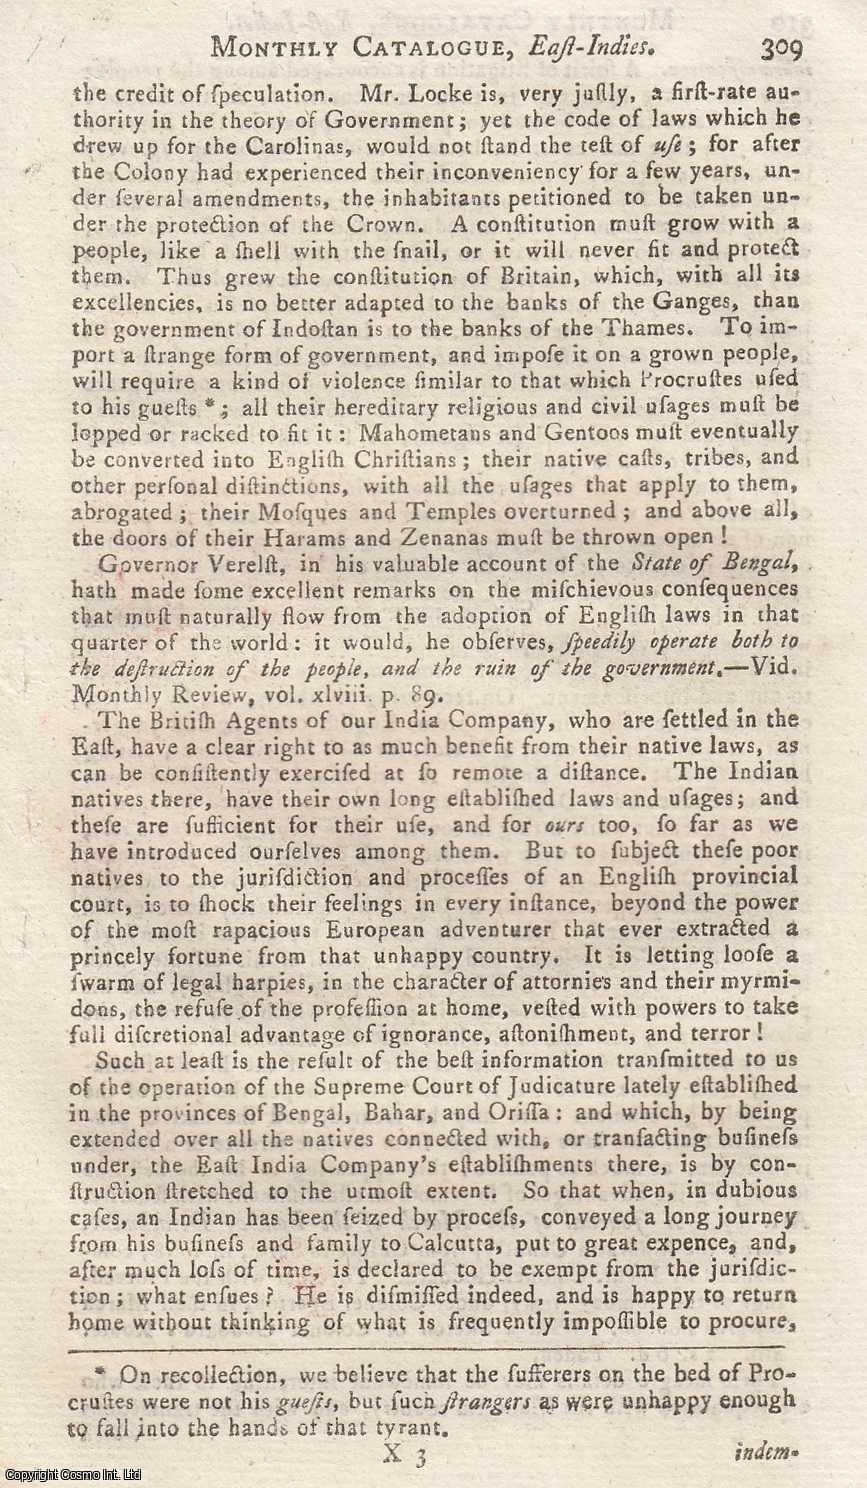 Author Not Stated - East Indies. An Account of an Arrest made at Dacca in Bengal, and a Rescue made by the Head Fouzdar of the Place. An original article from the Monthly Review, 1781.